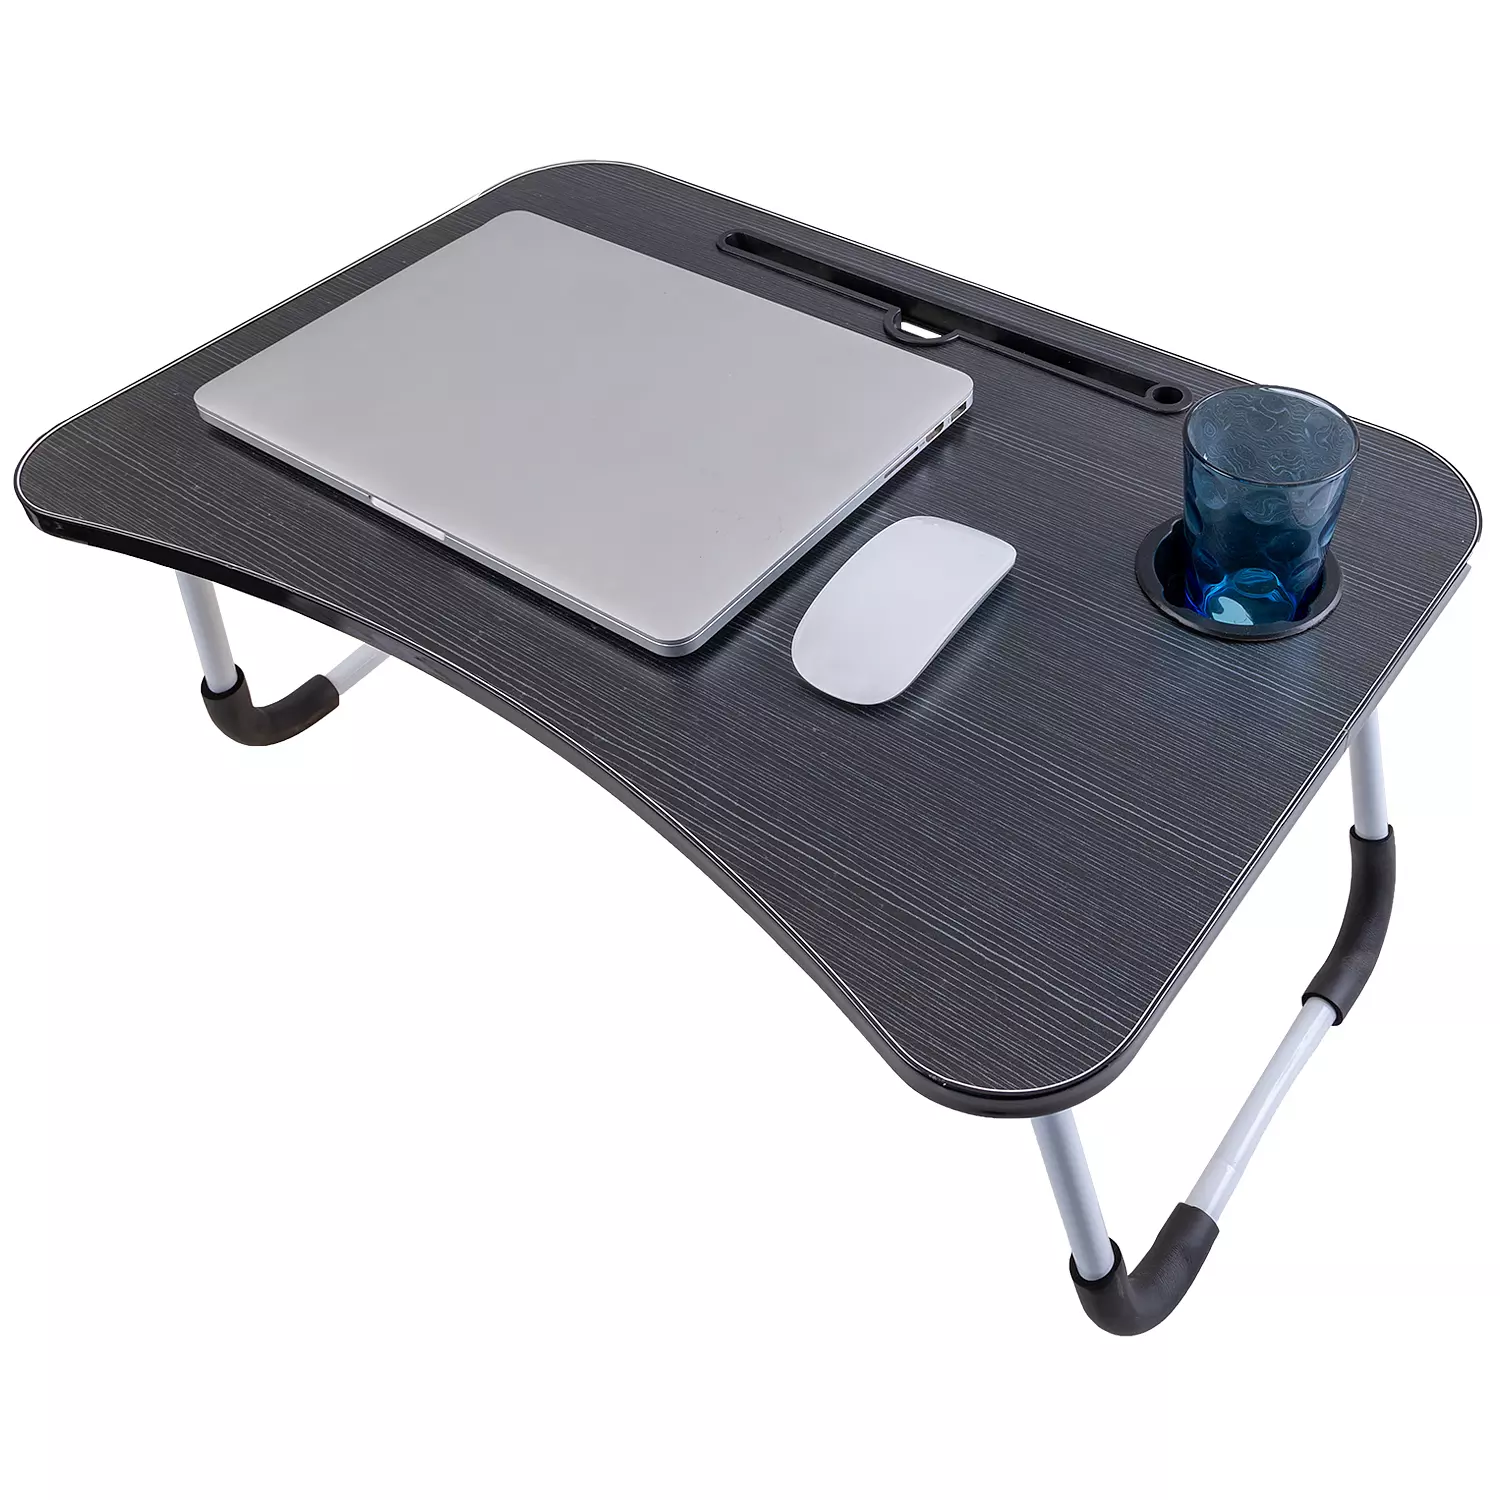 Folding laptop desk / tray table with cup slot, black wood